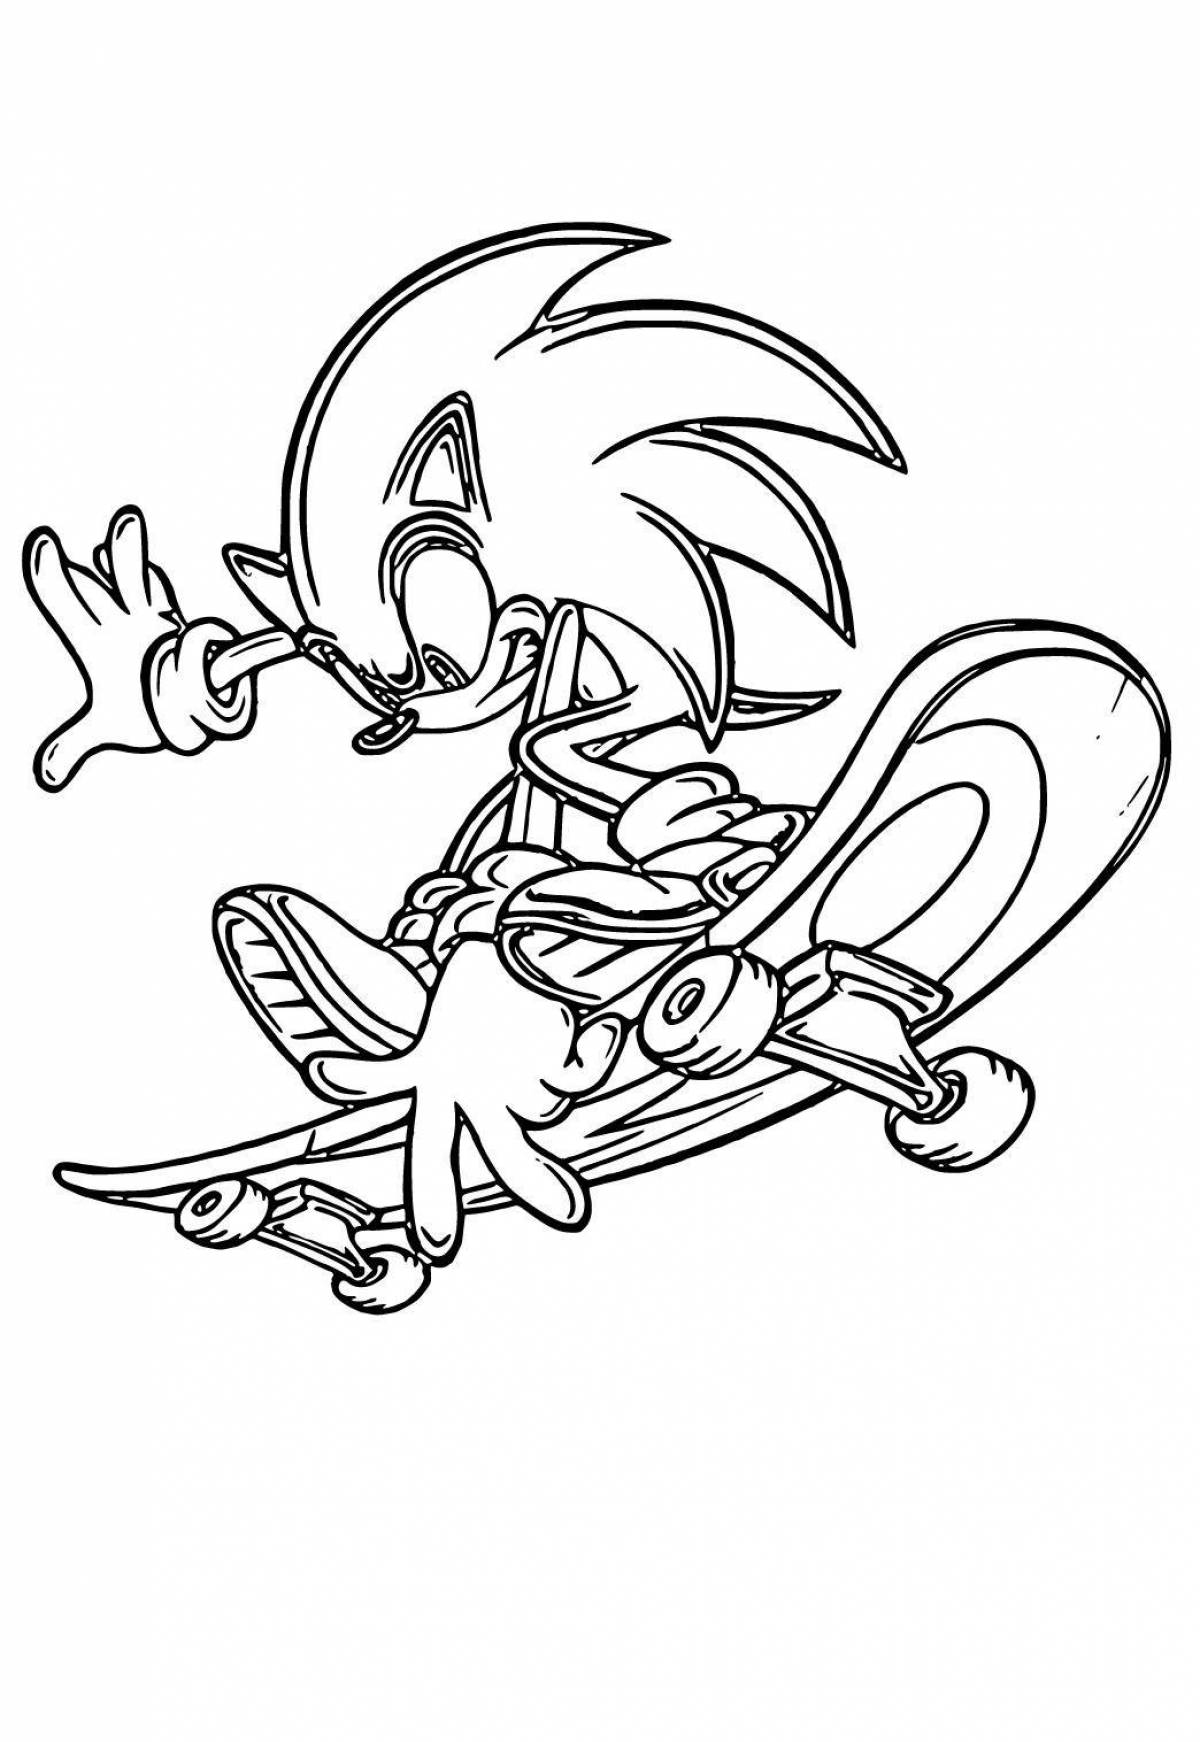 Xs sonic incredible coloring book